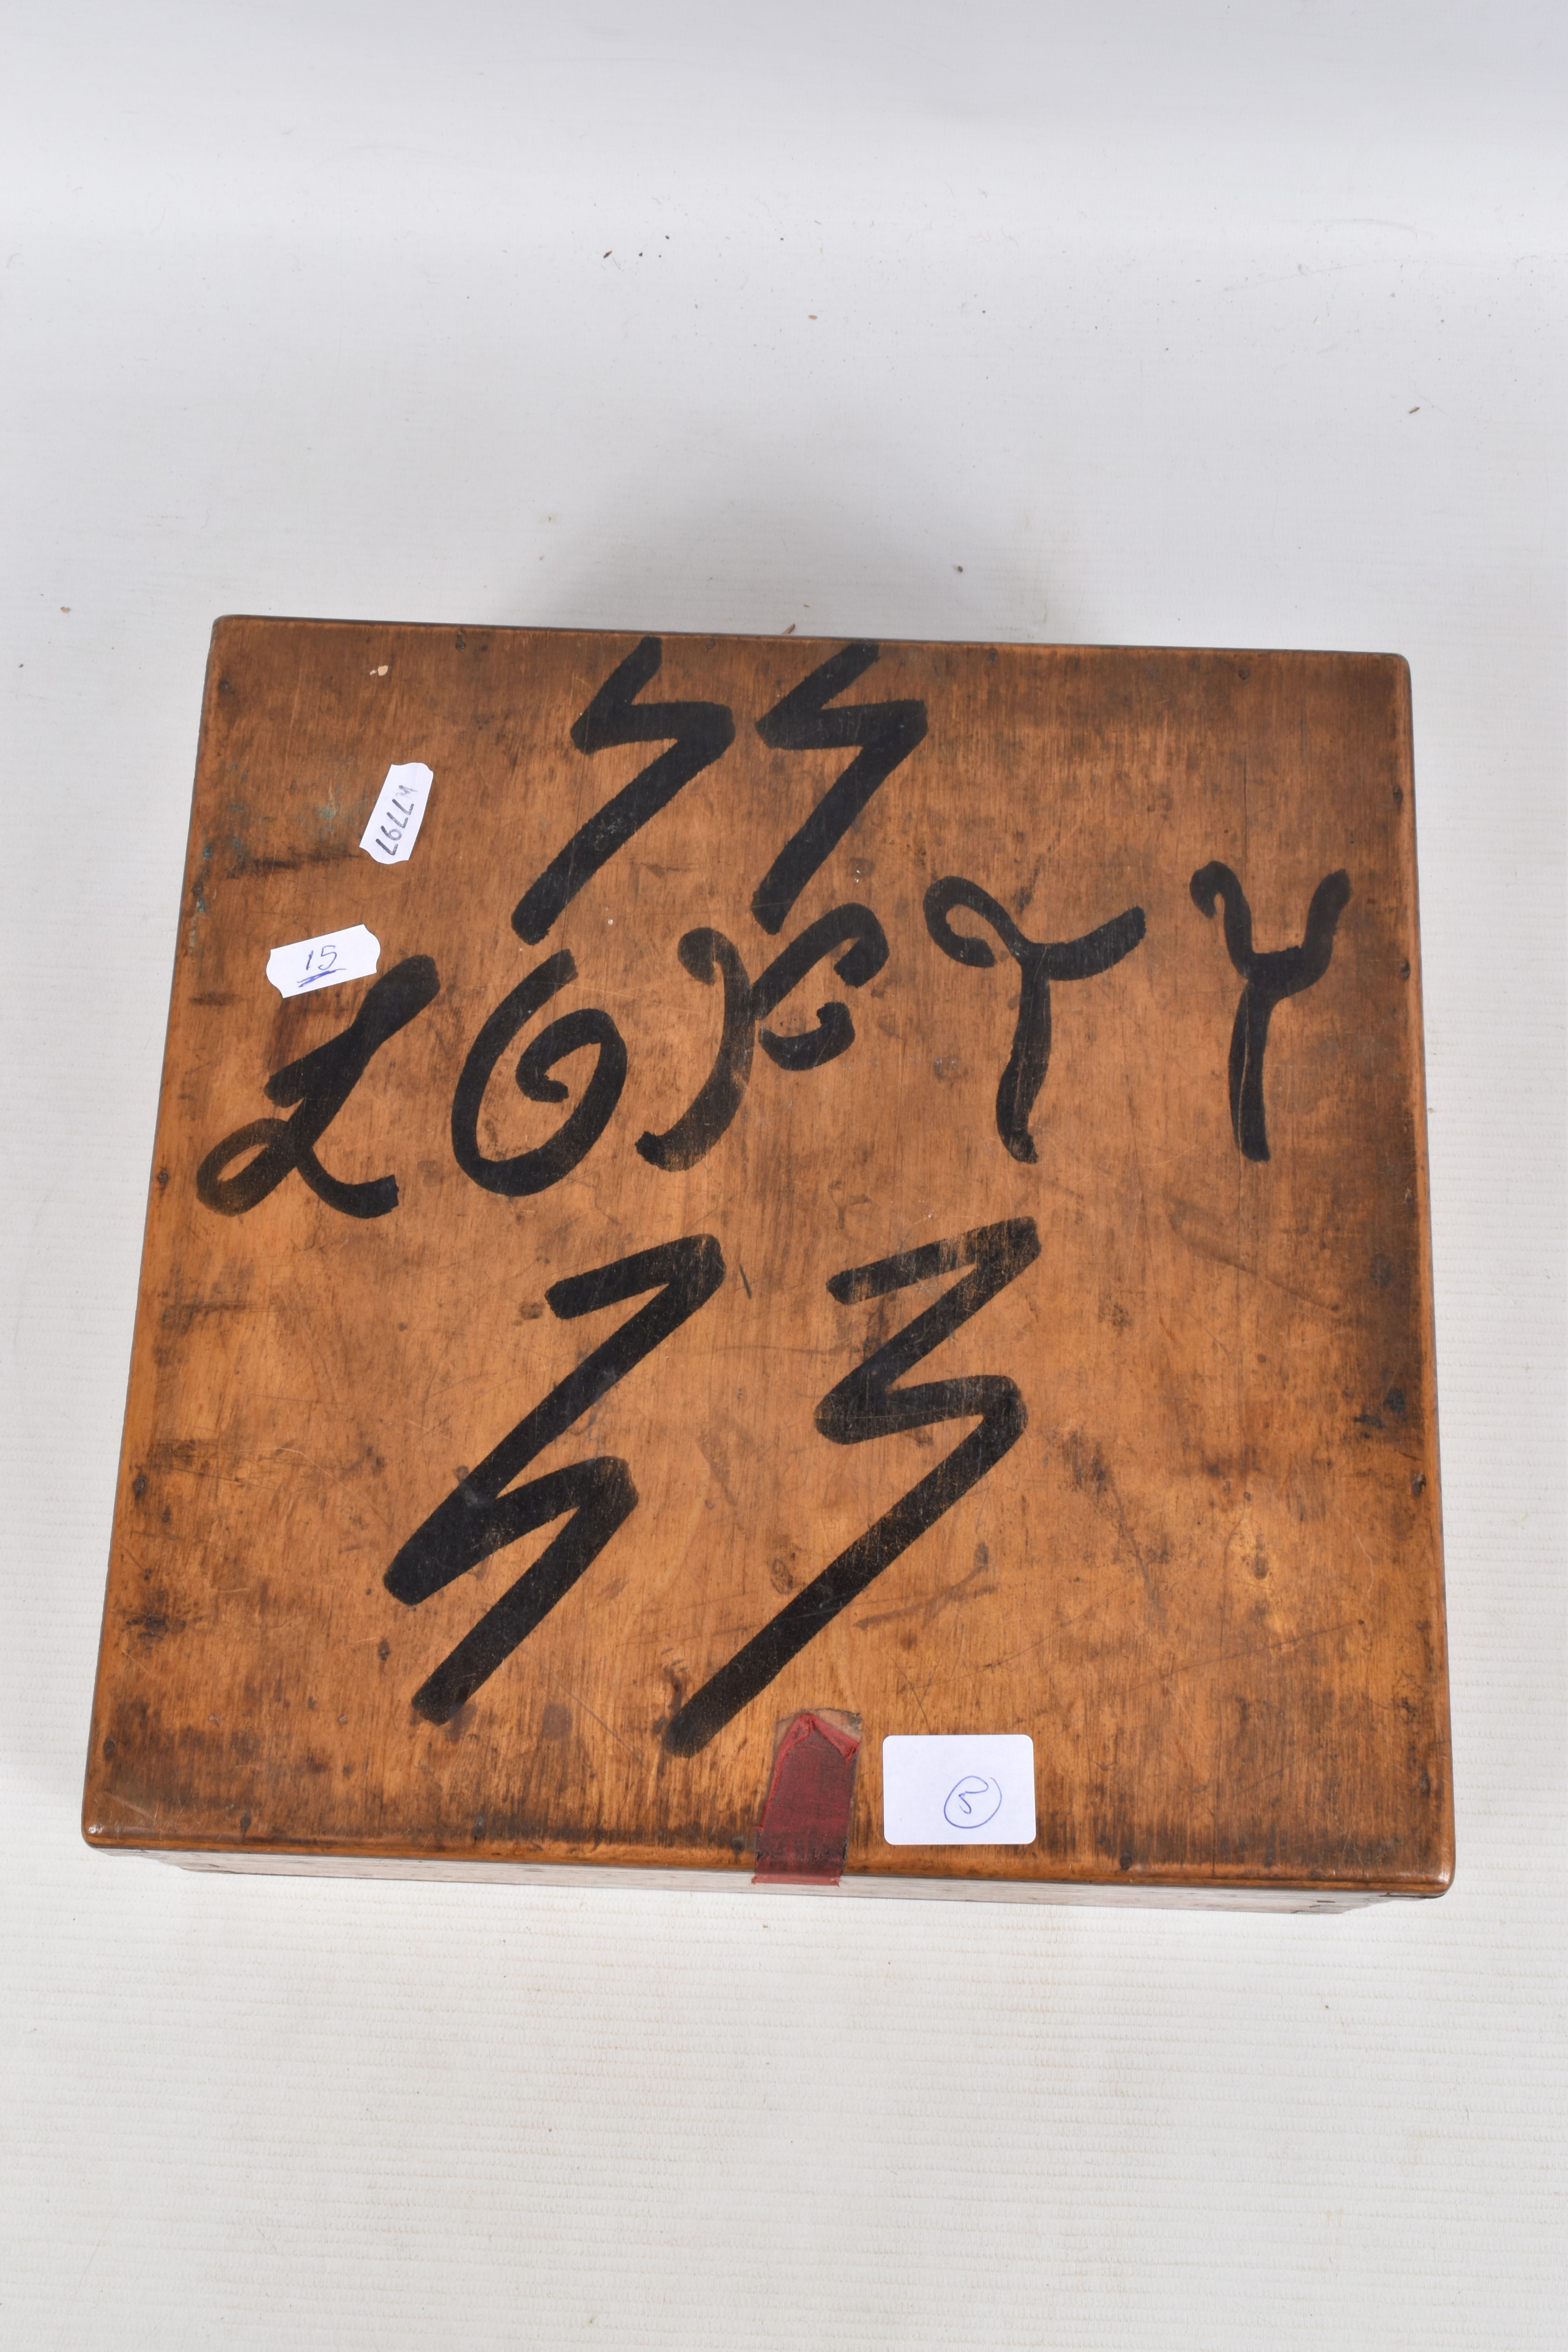 A WOODEN BOX CONTAINING TWO SETS OF WWII MEDALS, cap badges, formation patches and other military - Image 22 of 22